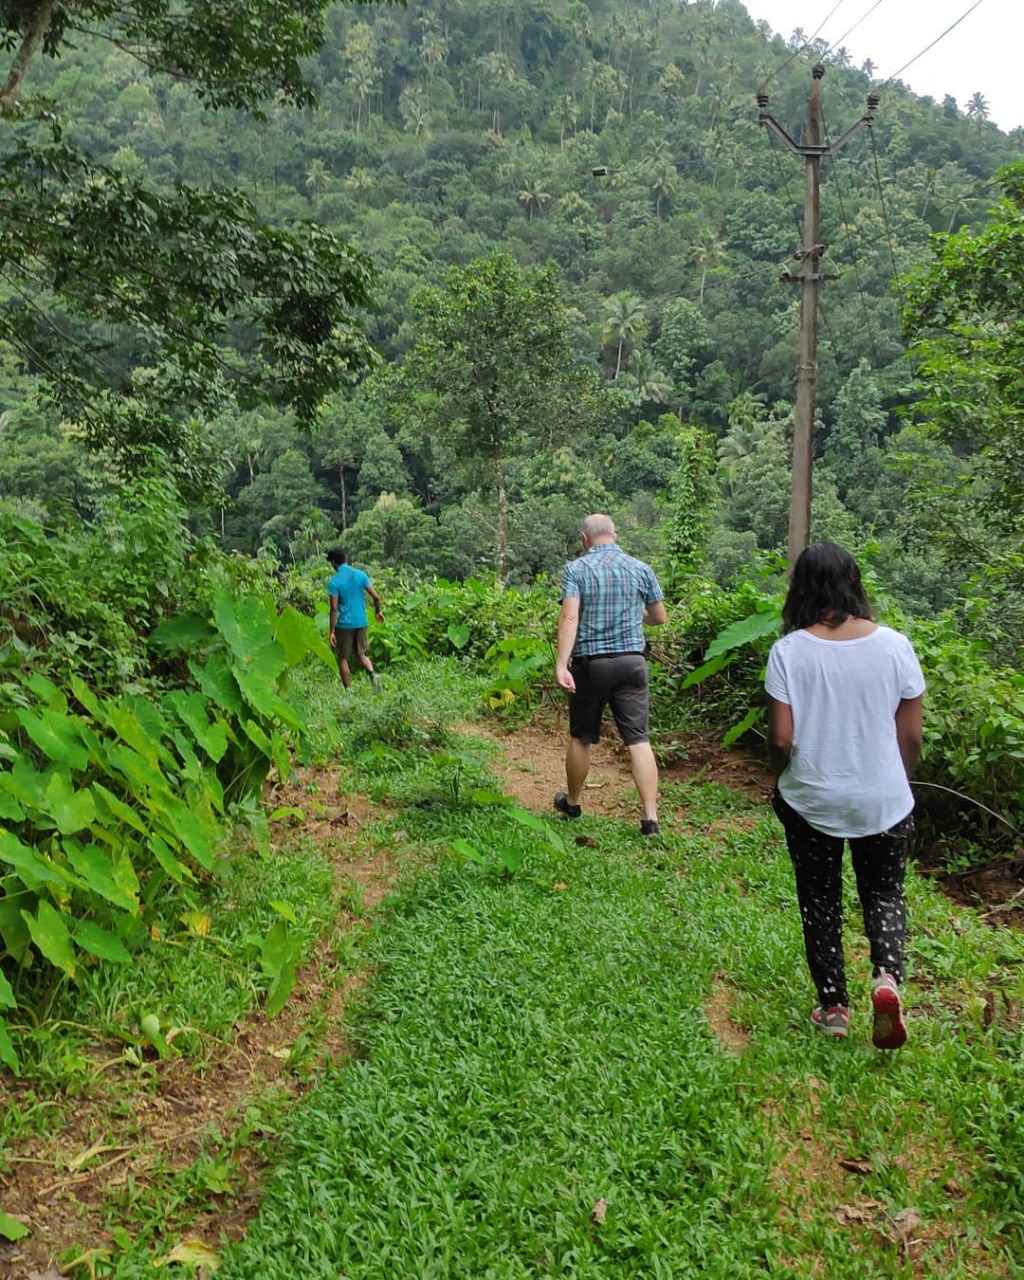 The spice trail at Vanilla County includes a walk through the plantations of pepper, cardamom, cloves and tea